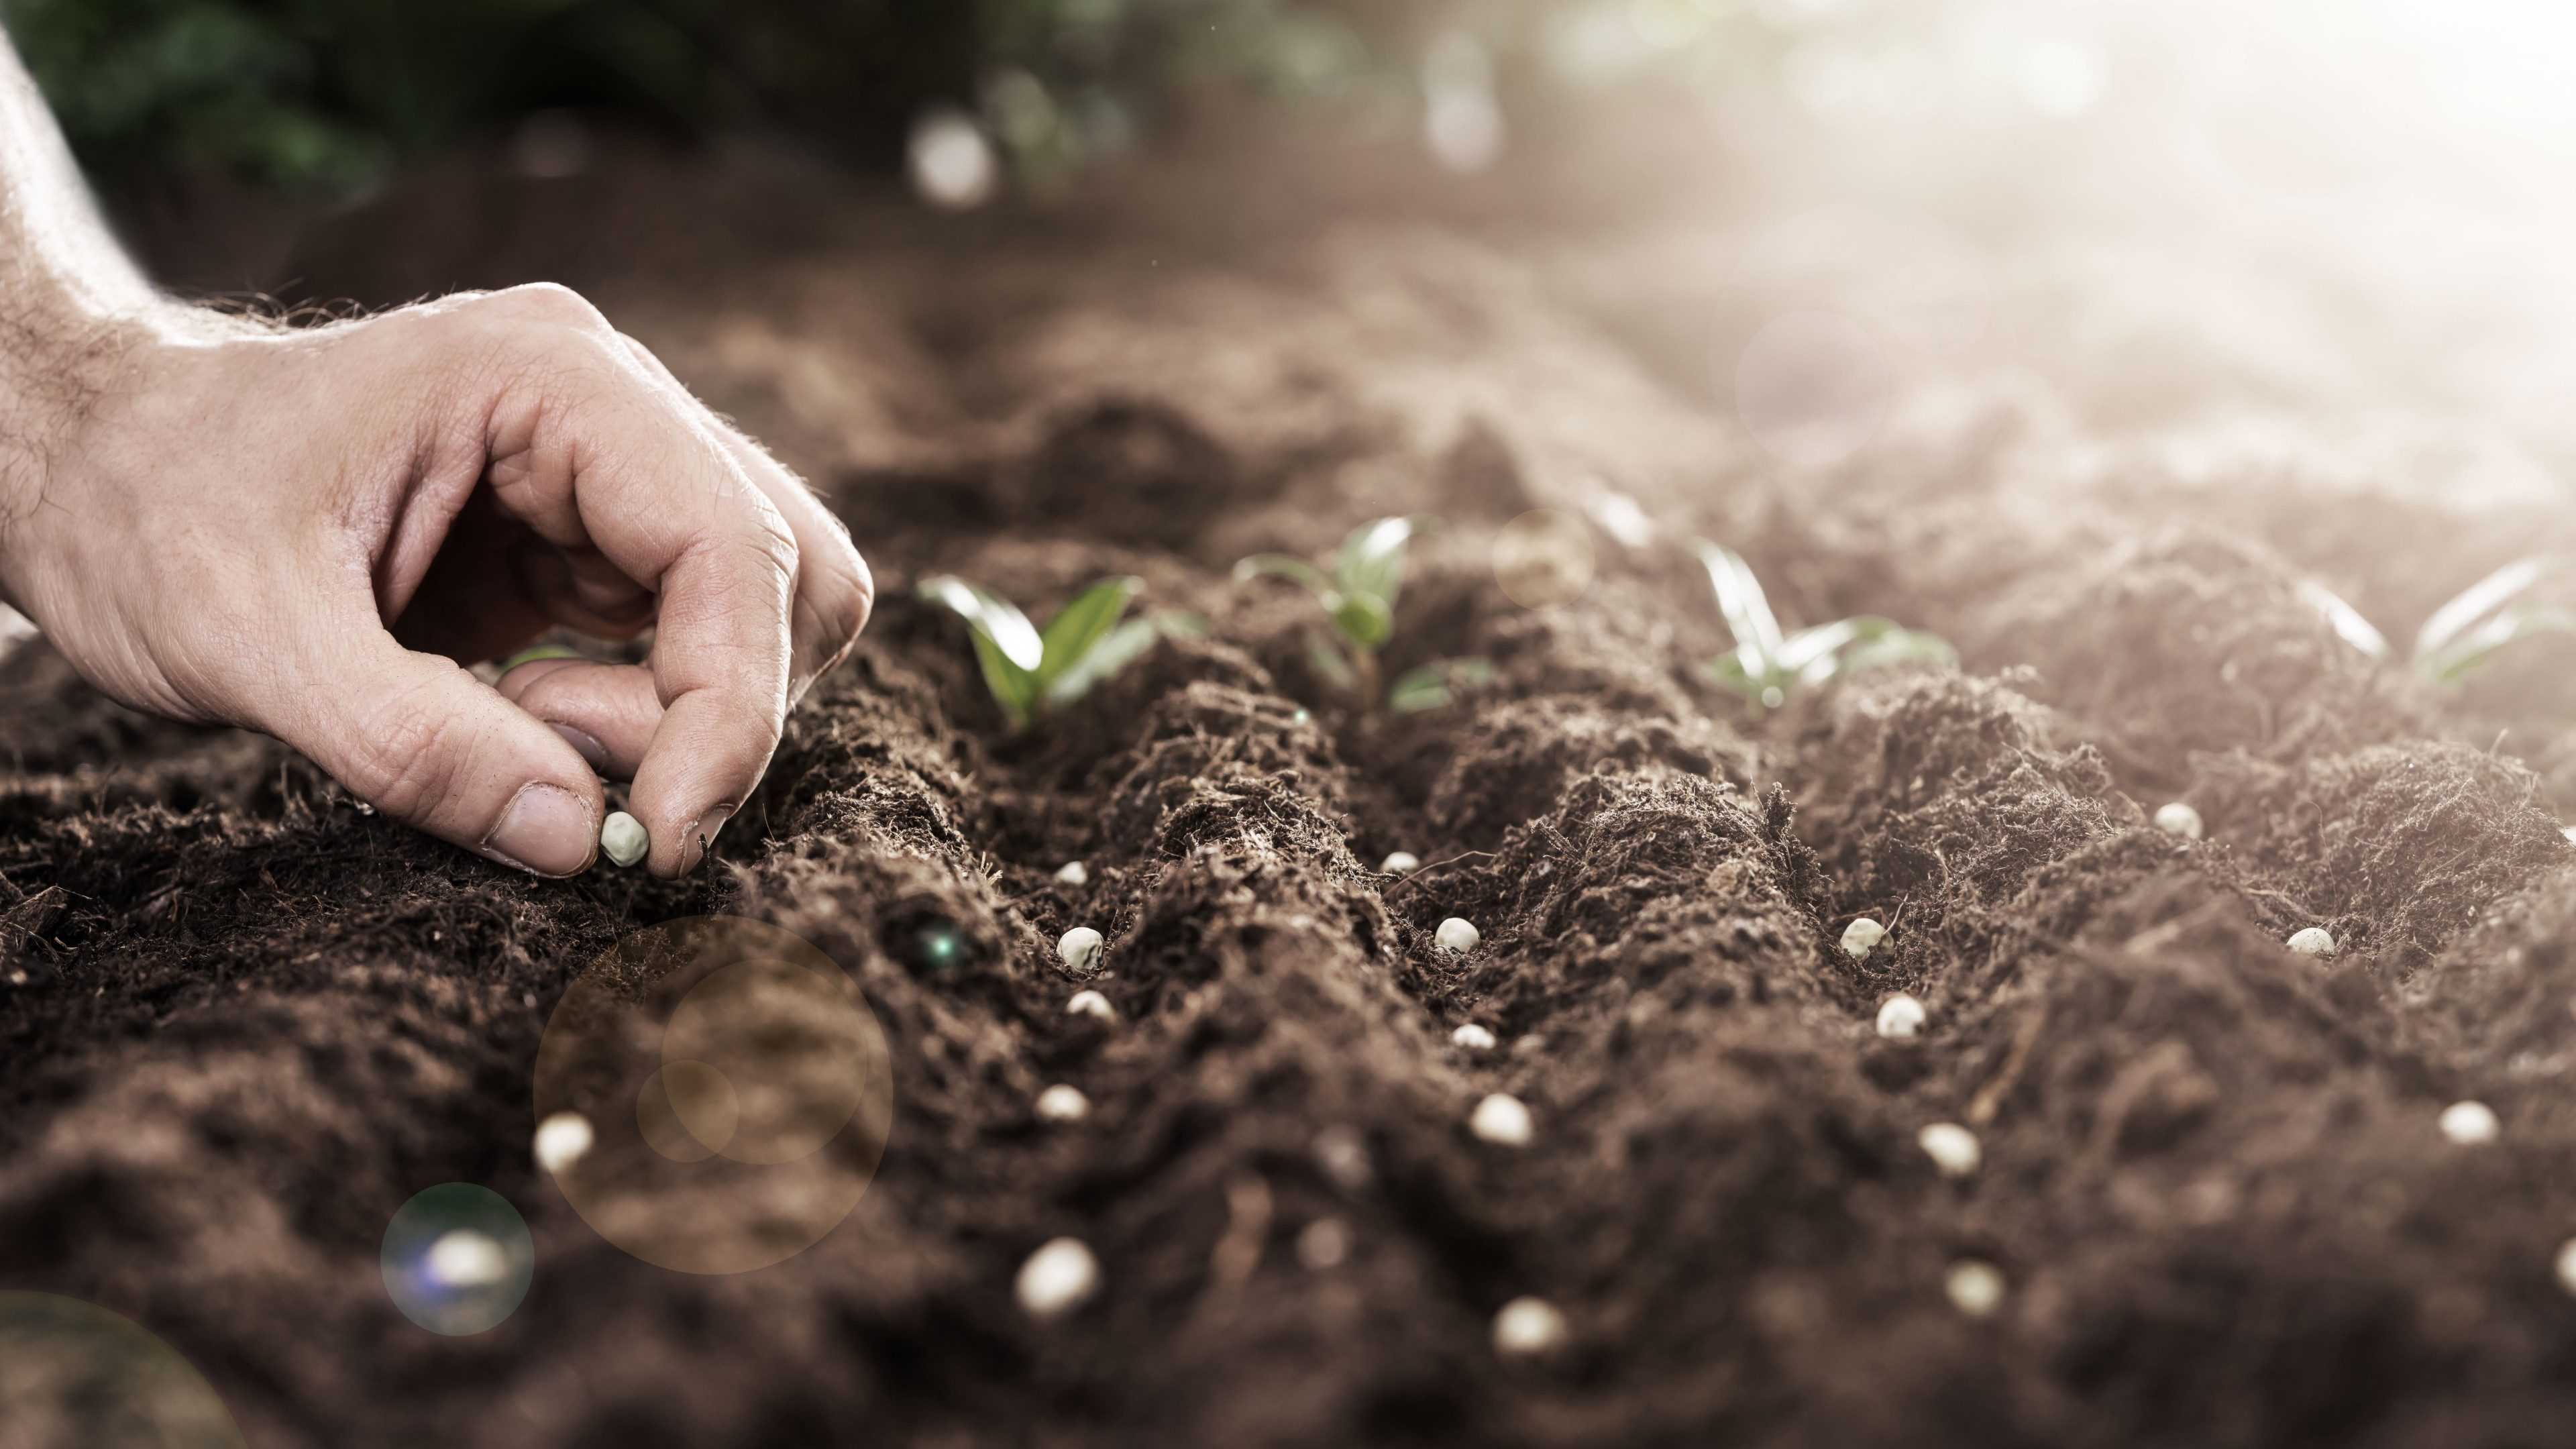 Farmer's Hand Planting Seeds In Soil In Rows